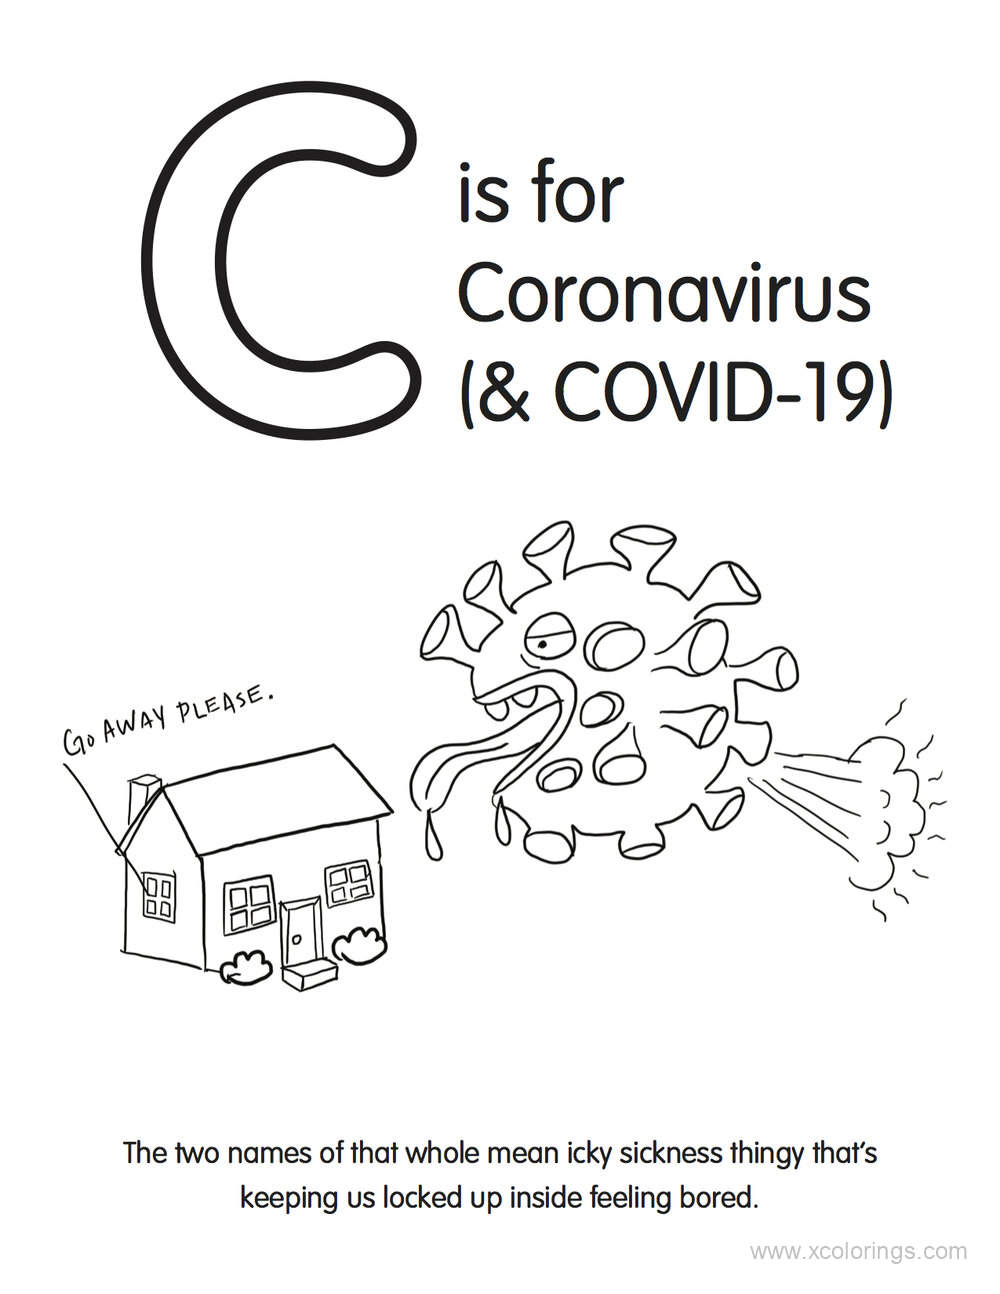 Free Letter C is forCoronavirus Coloring Pages printable